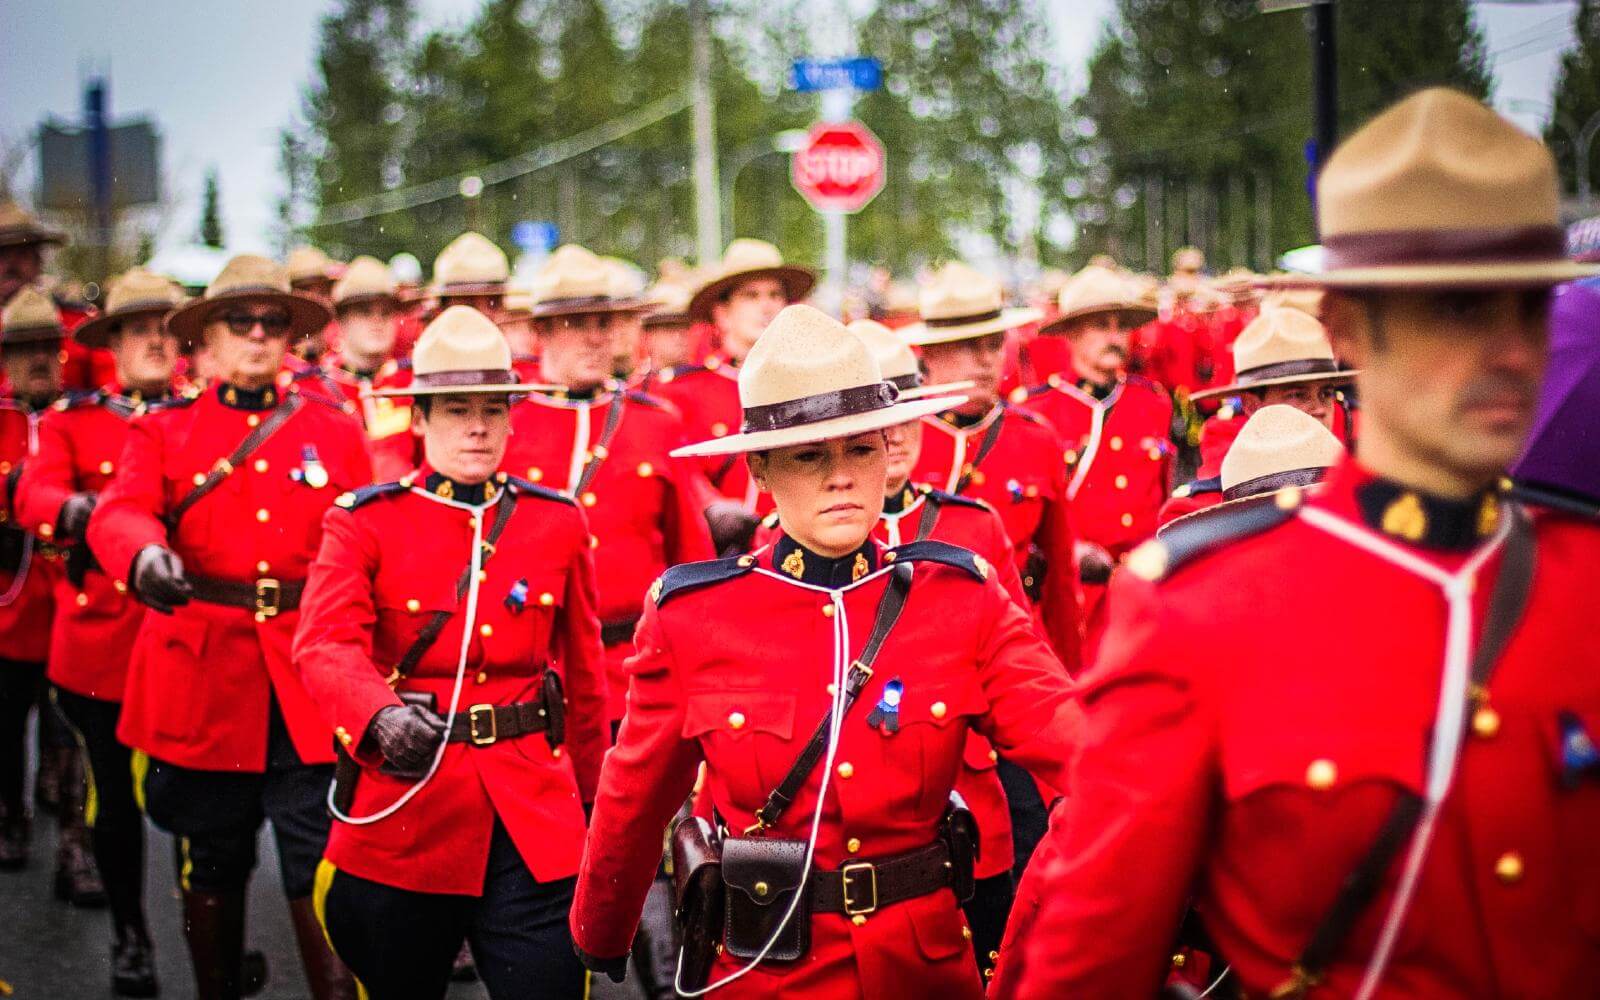 rcmp officers marching in the canada day parade on july 1st in vancouver bc canada